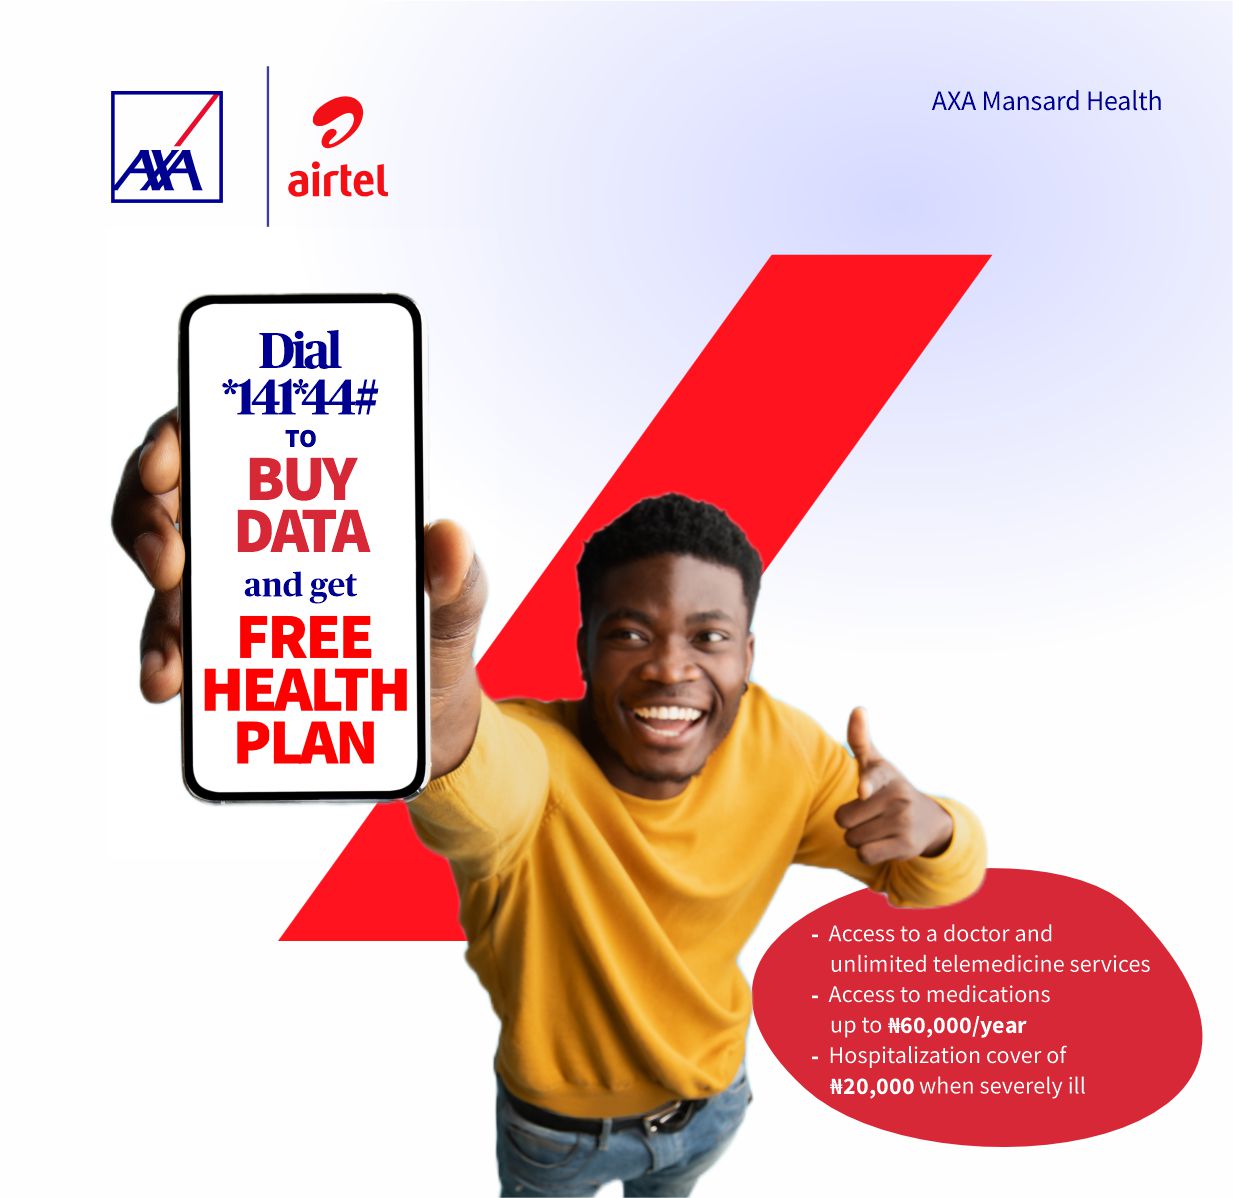 AXA Mansard Health Insurance on Airtel Data: What you need to know